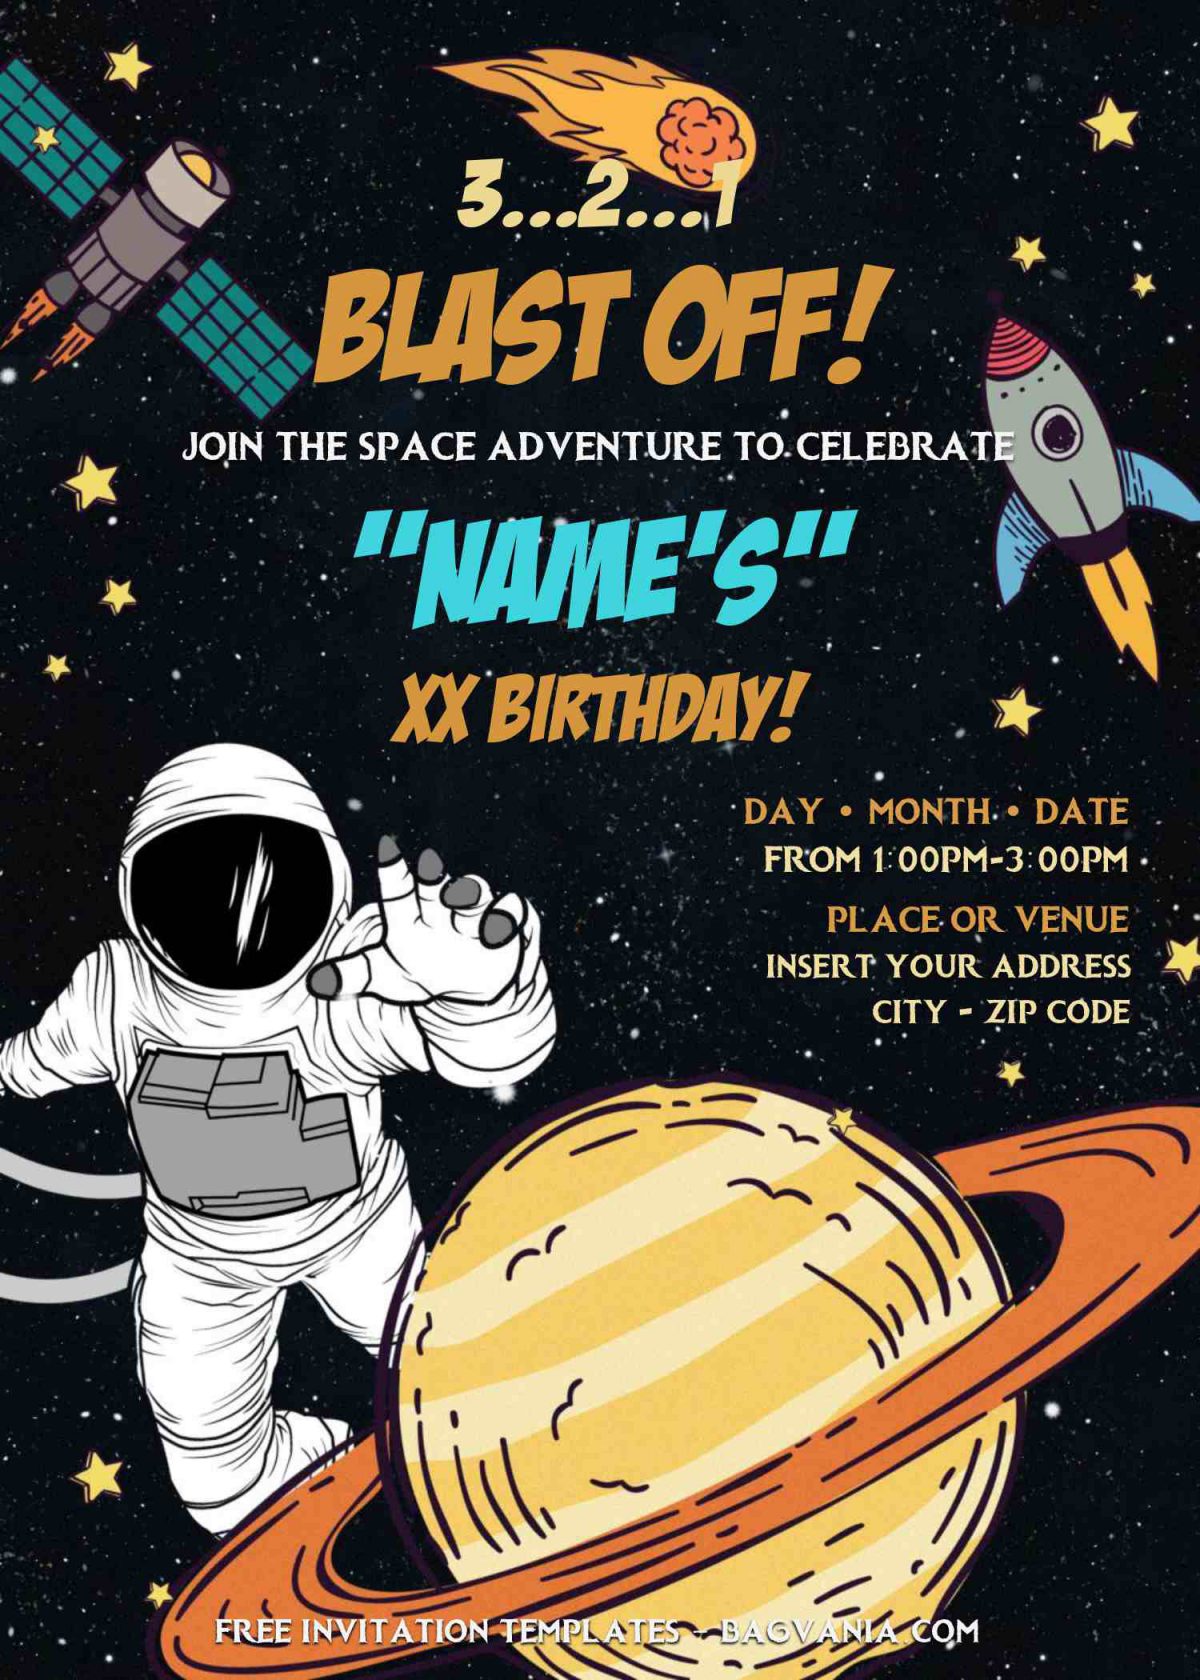 Free Astronaut Birthday Invitation Templates For Word and has satellite and space rocket